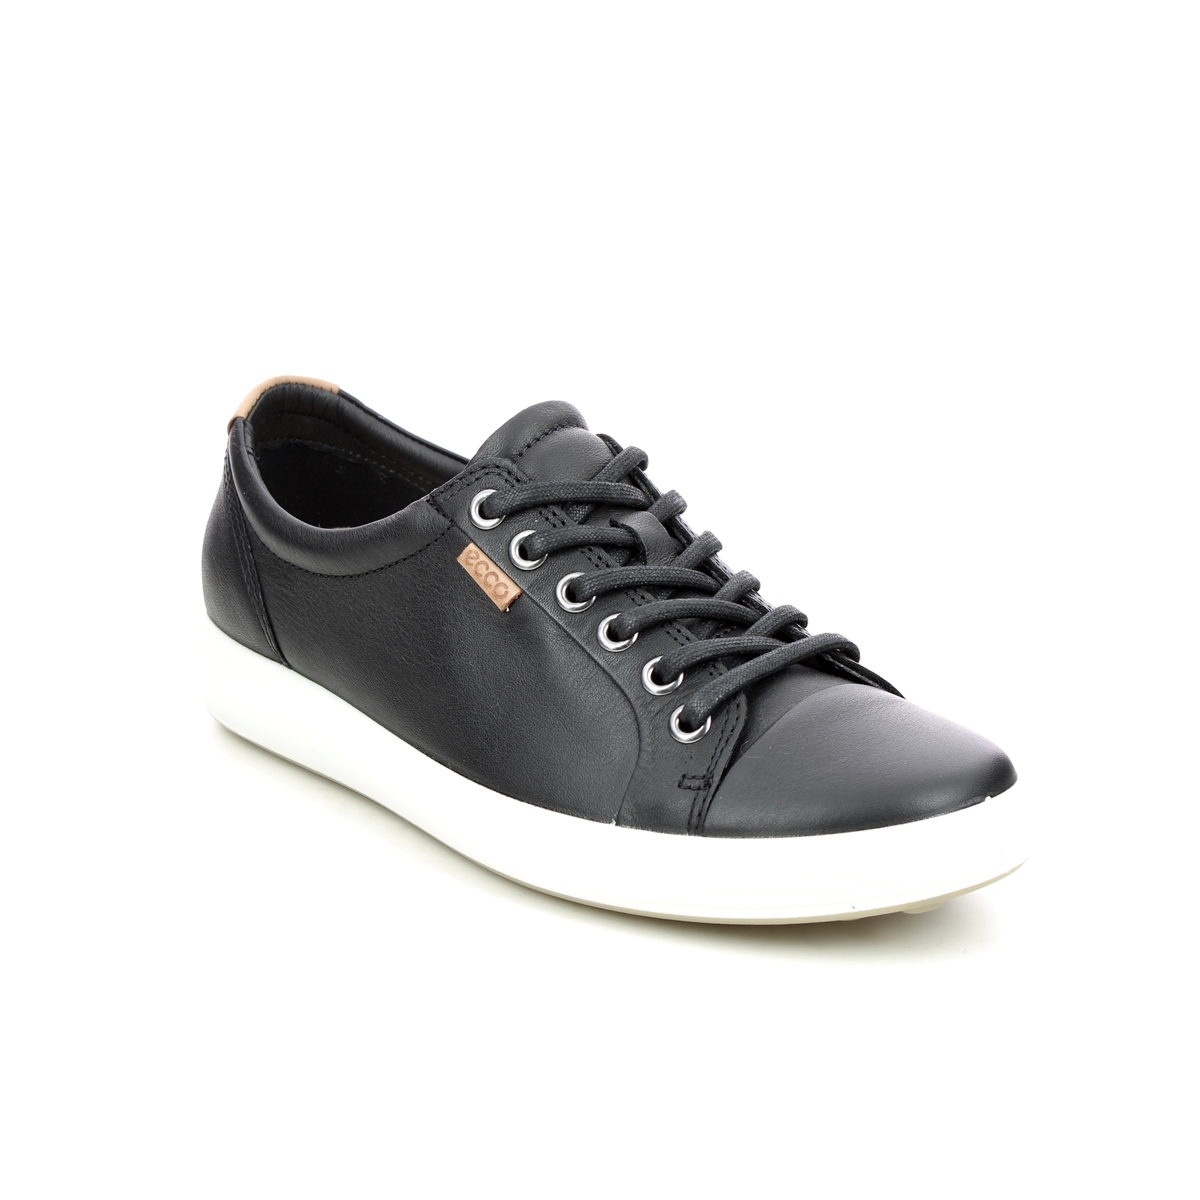 Ecco Soft 7 Lace Black Leather Womens Trainers 430003-01001 In Size 37 In Plain Black Leather